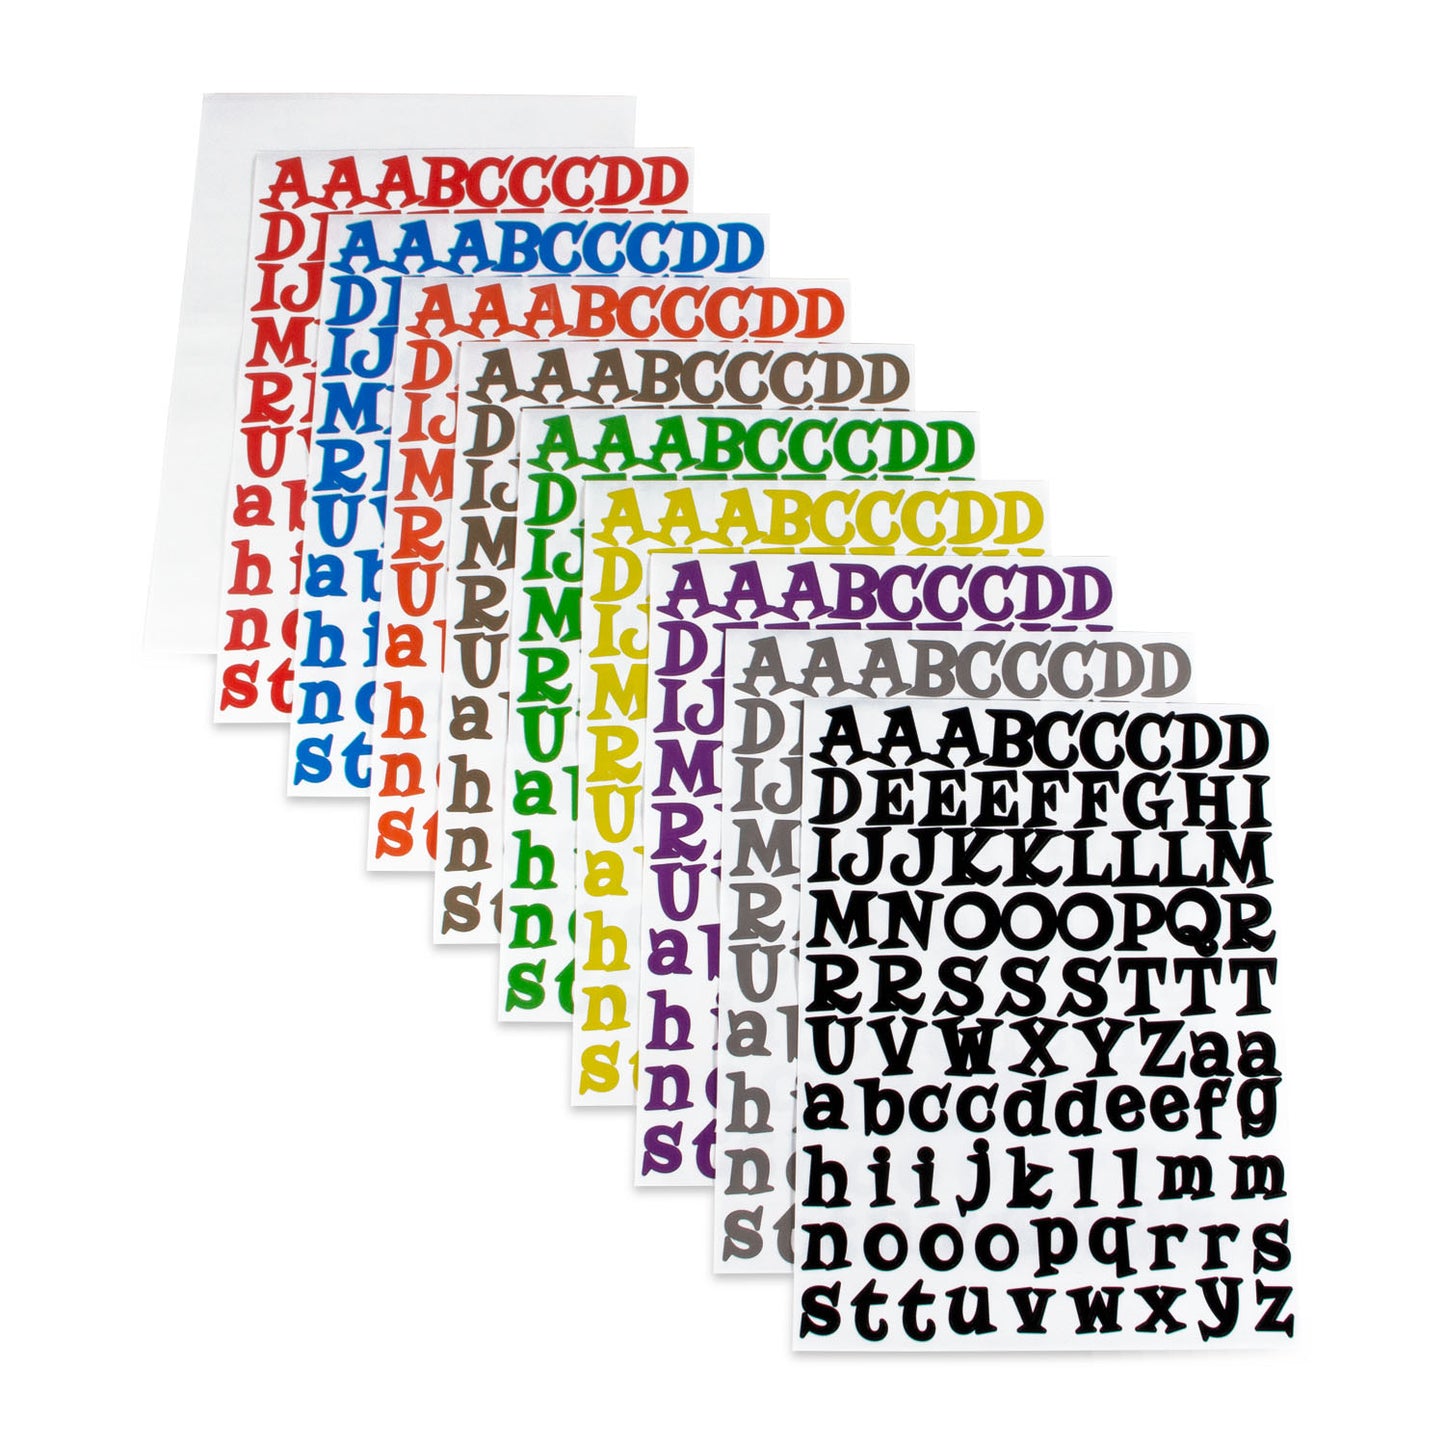 0.8" tall | 10 Sets of Capital Letter Alphabet & 10 Sets of Lower Case Letter Alphabet Stickers